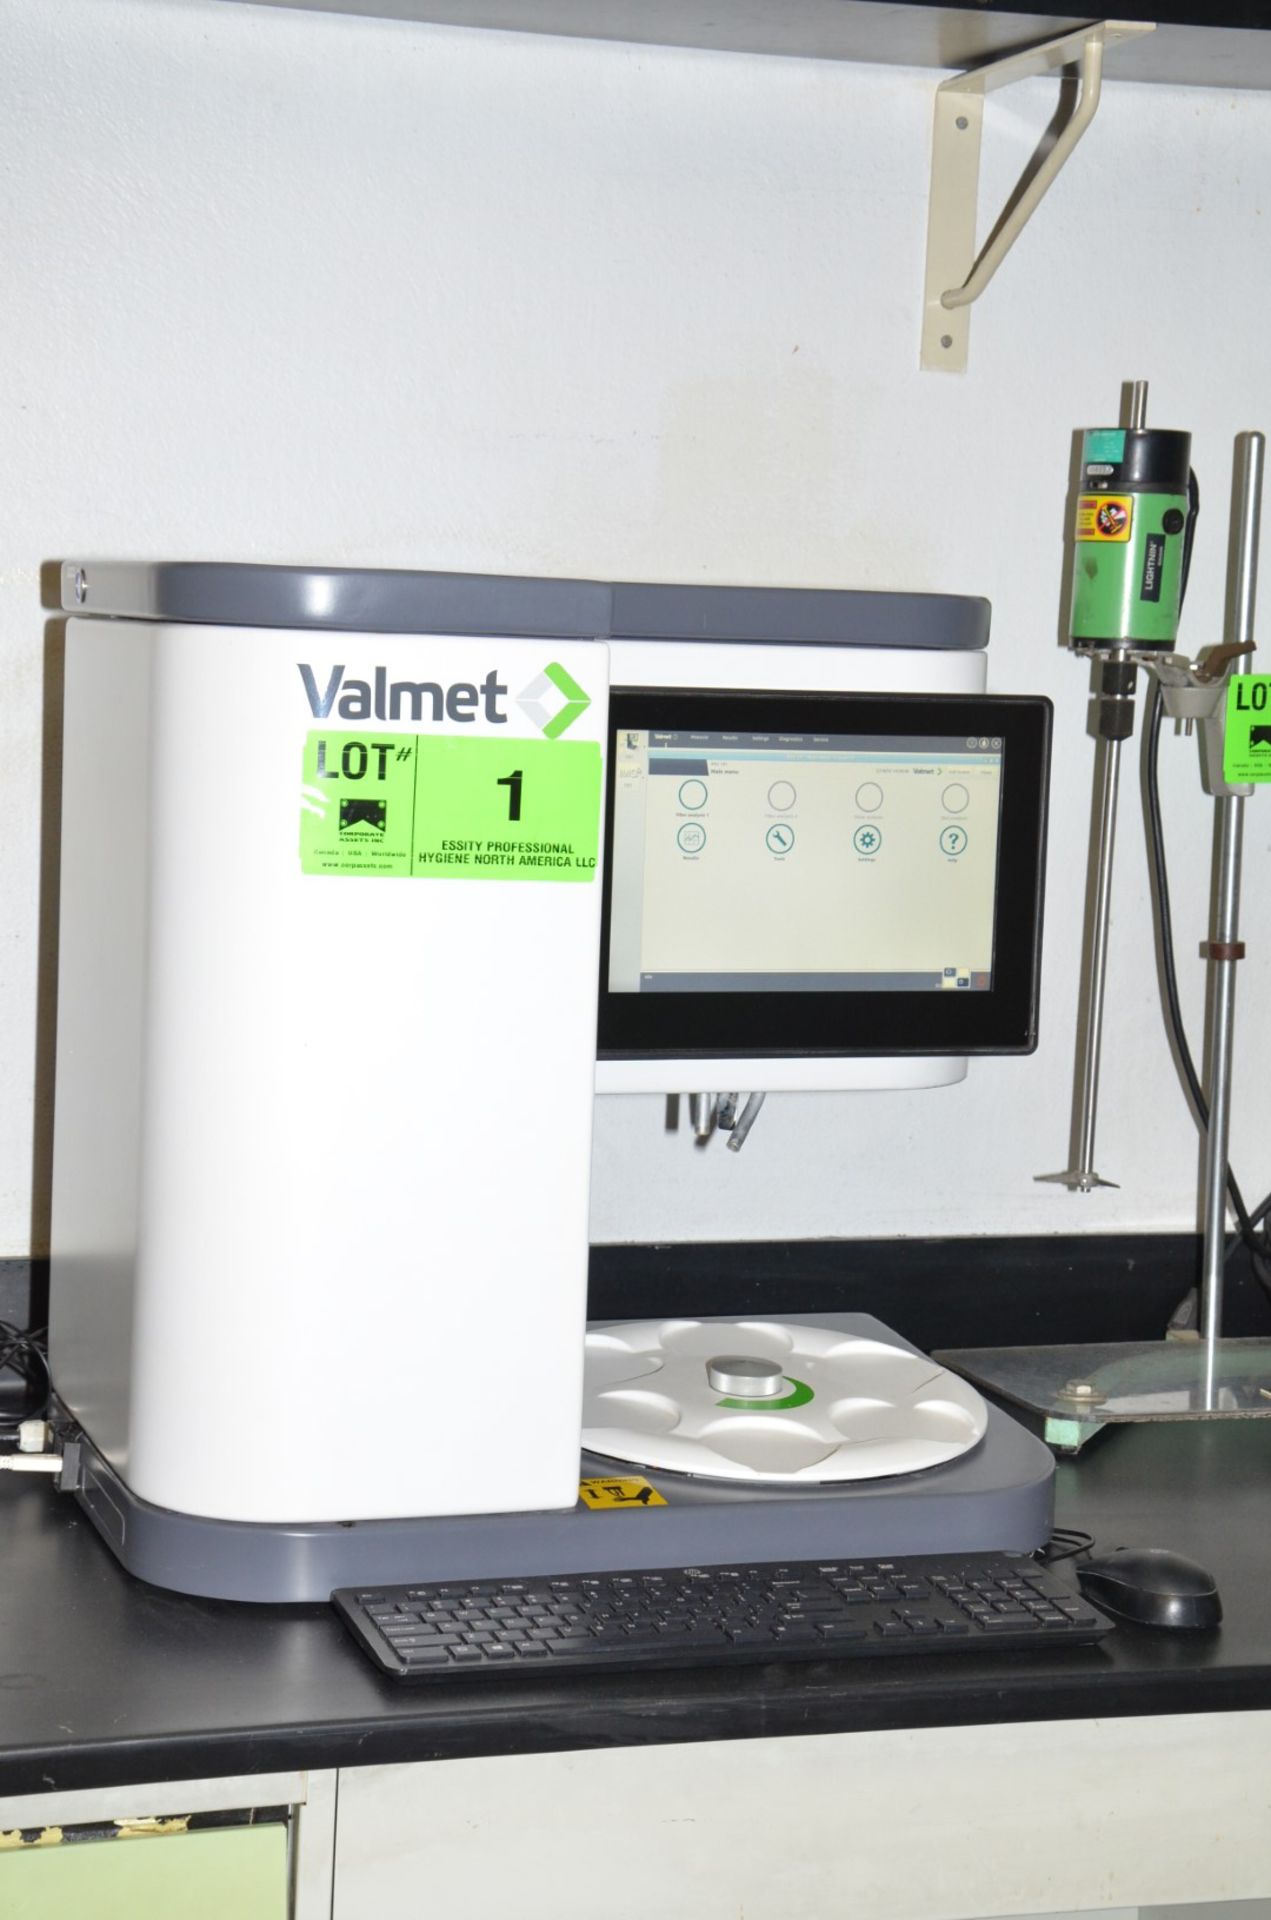 VALMET (2017) FS5 OPTICAL FIBER IMAGE ANALYZER WITH VALMET AUTOMATION VER 2.3 DIGITAL TOUCH SCREEN - Image 2 of 10